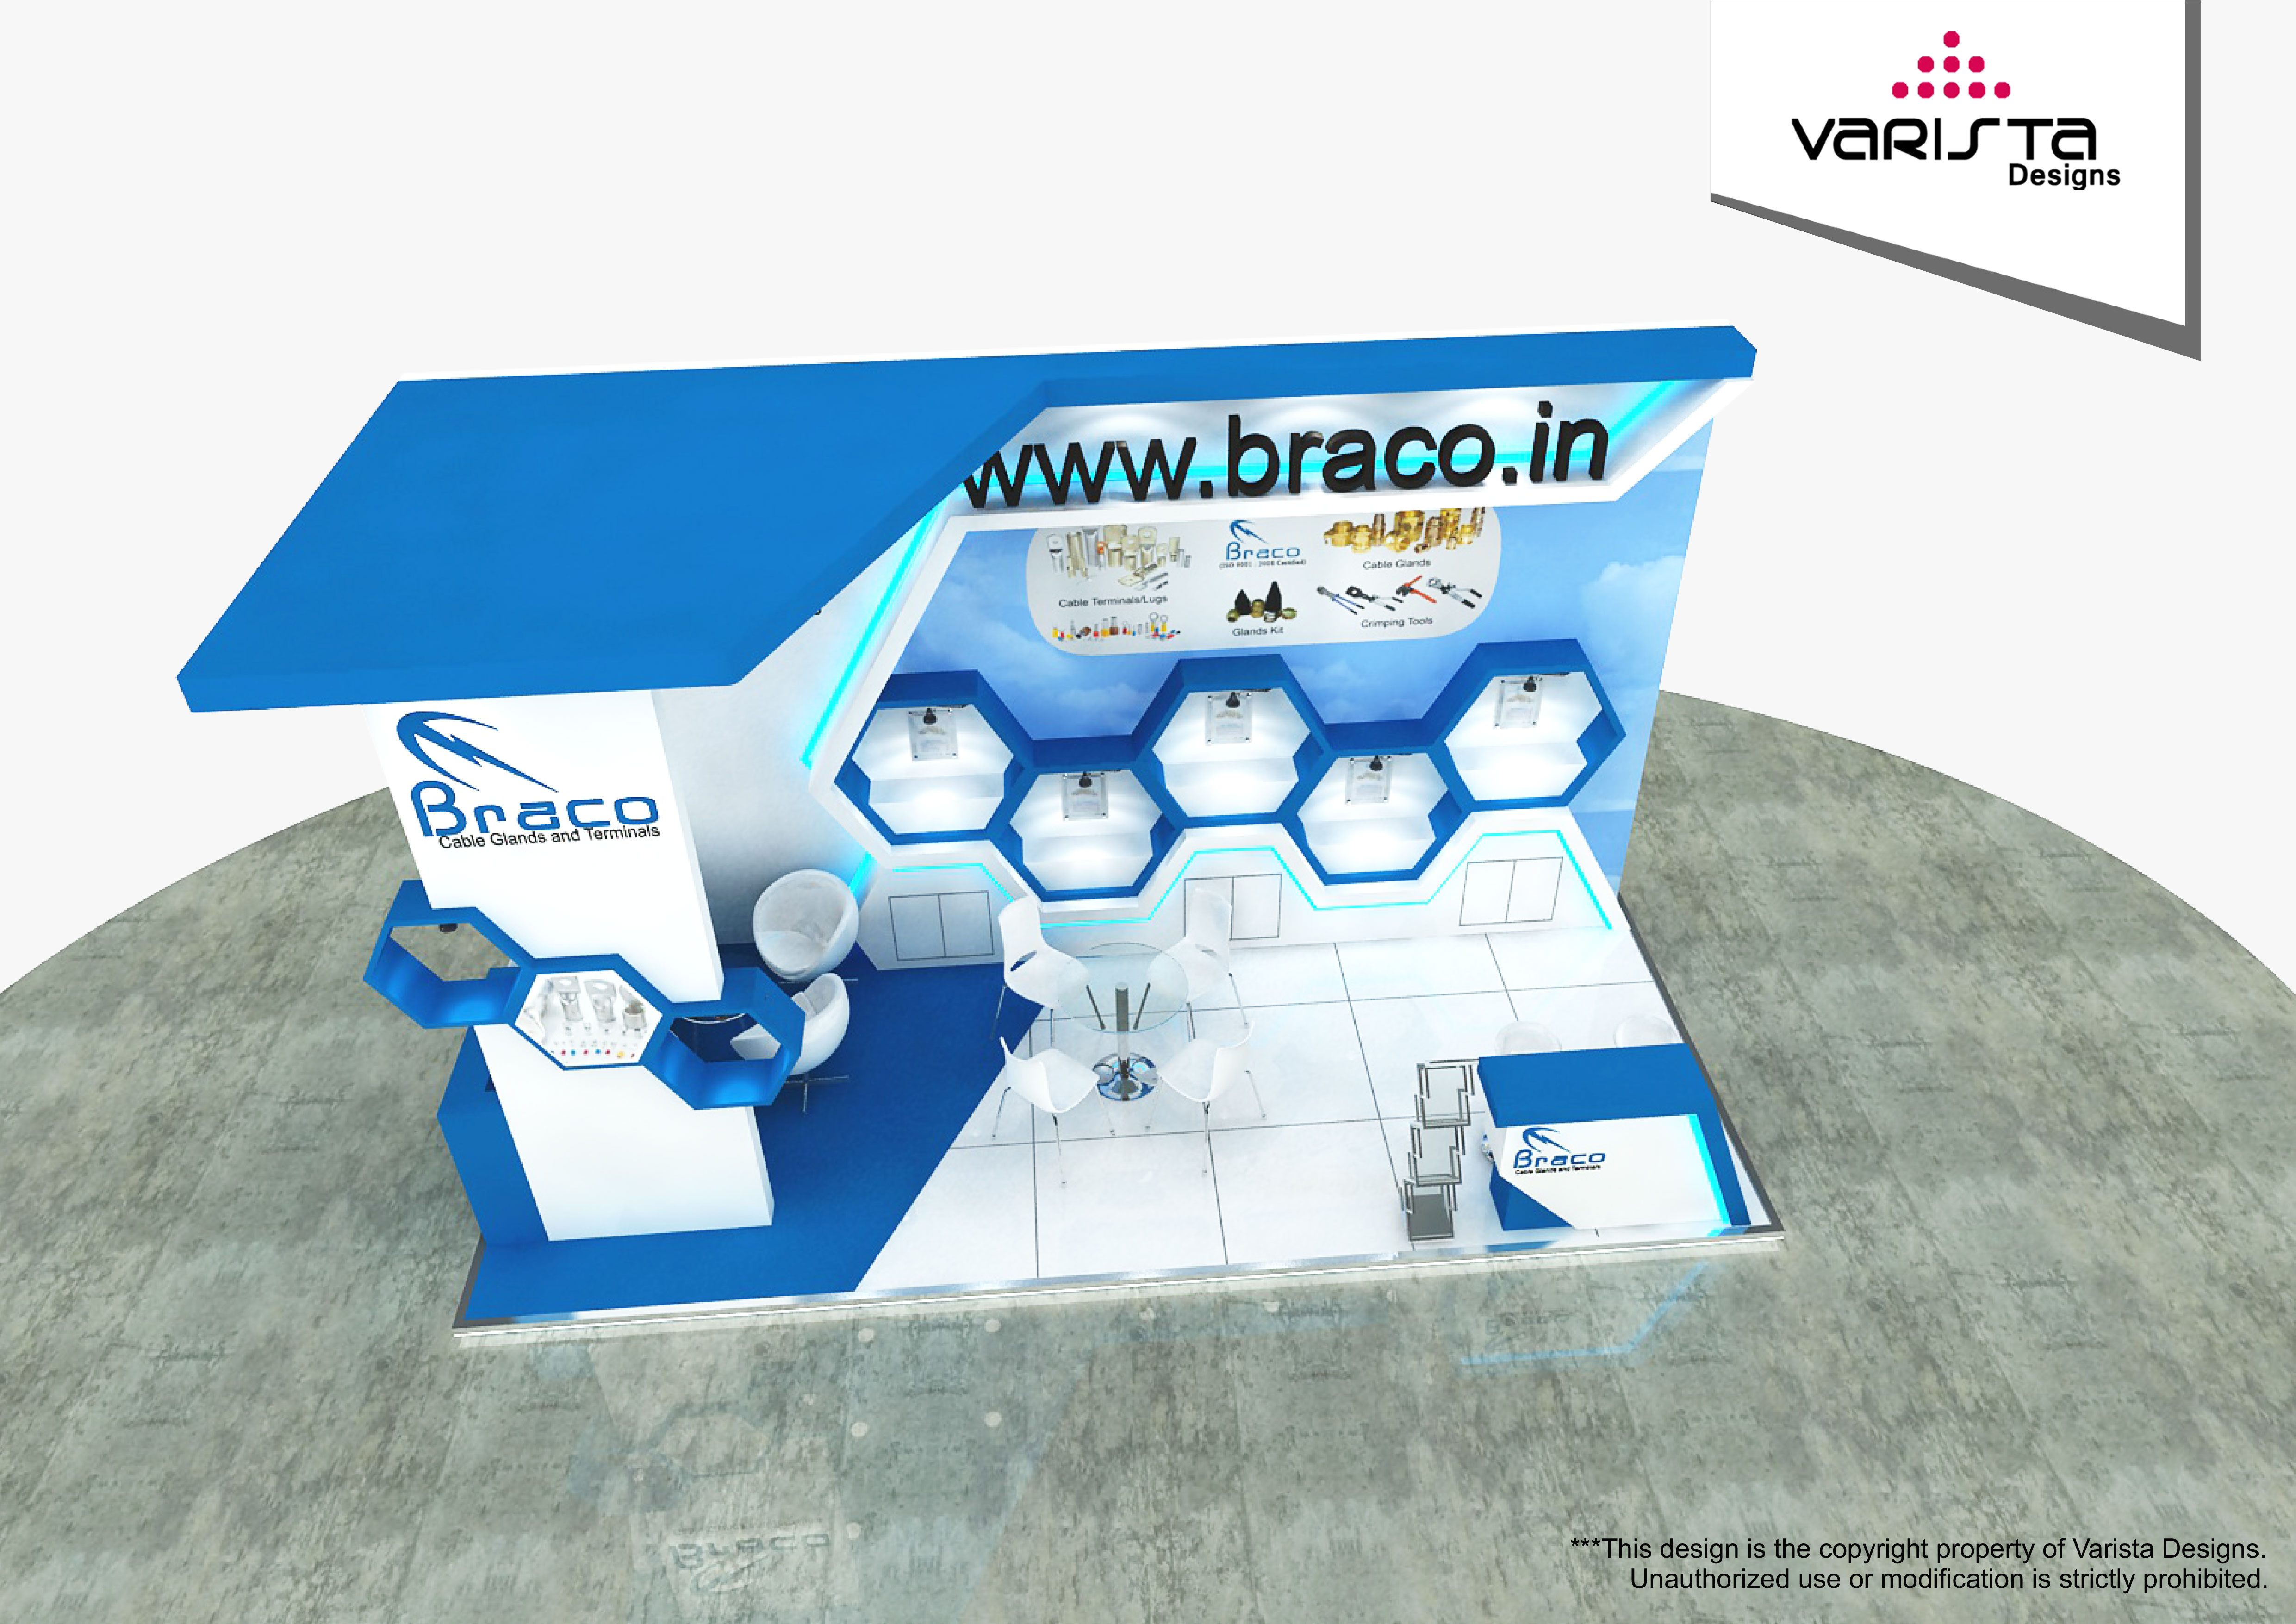 braco electrical exhibition stand design at mee dubai